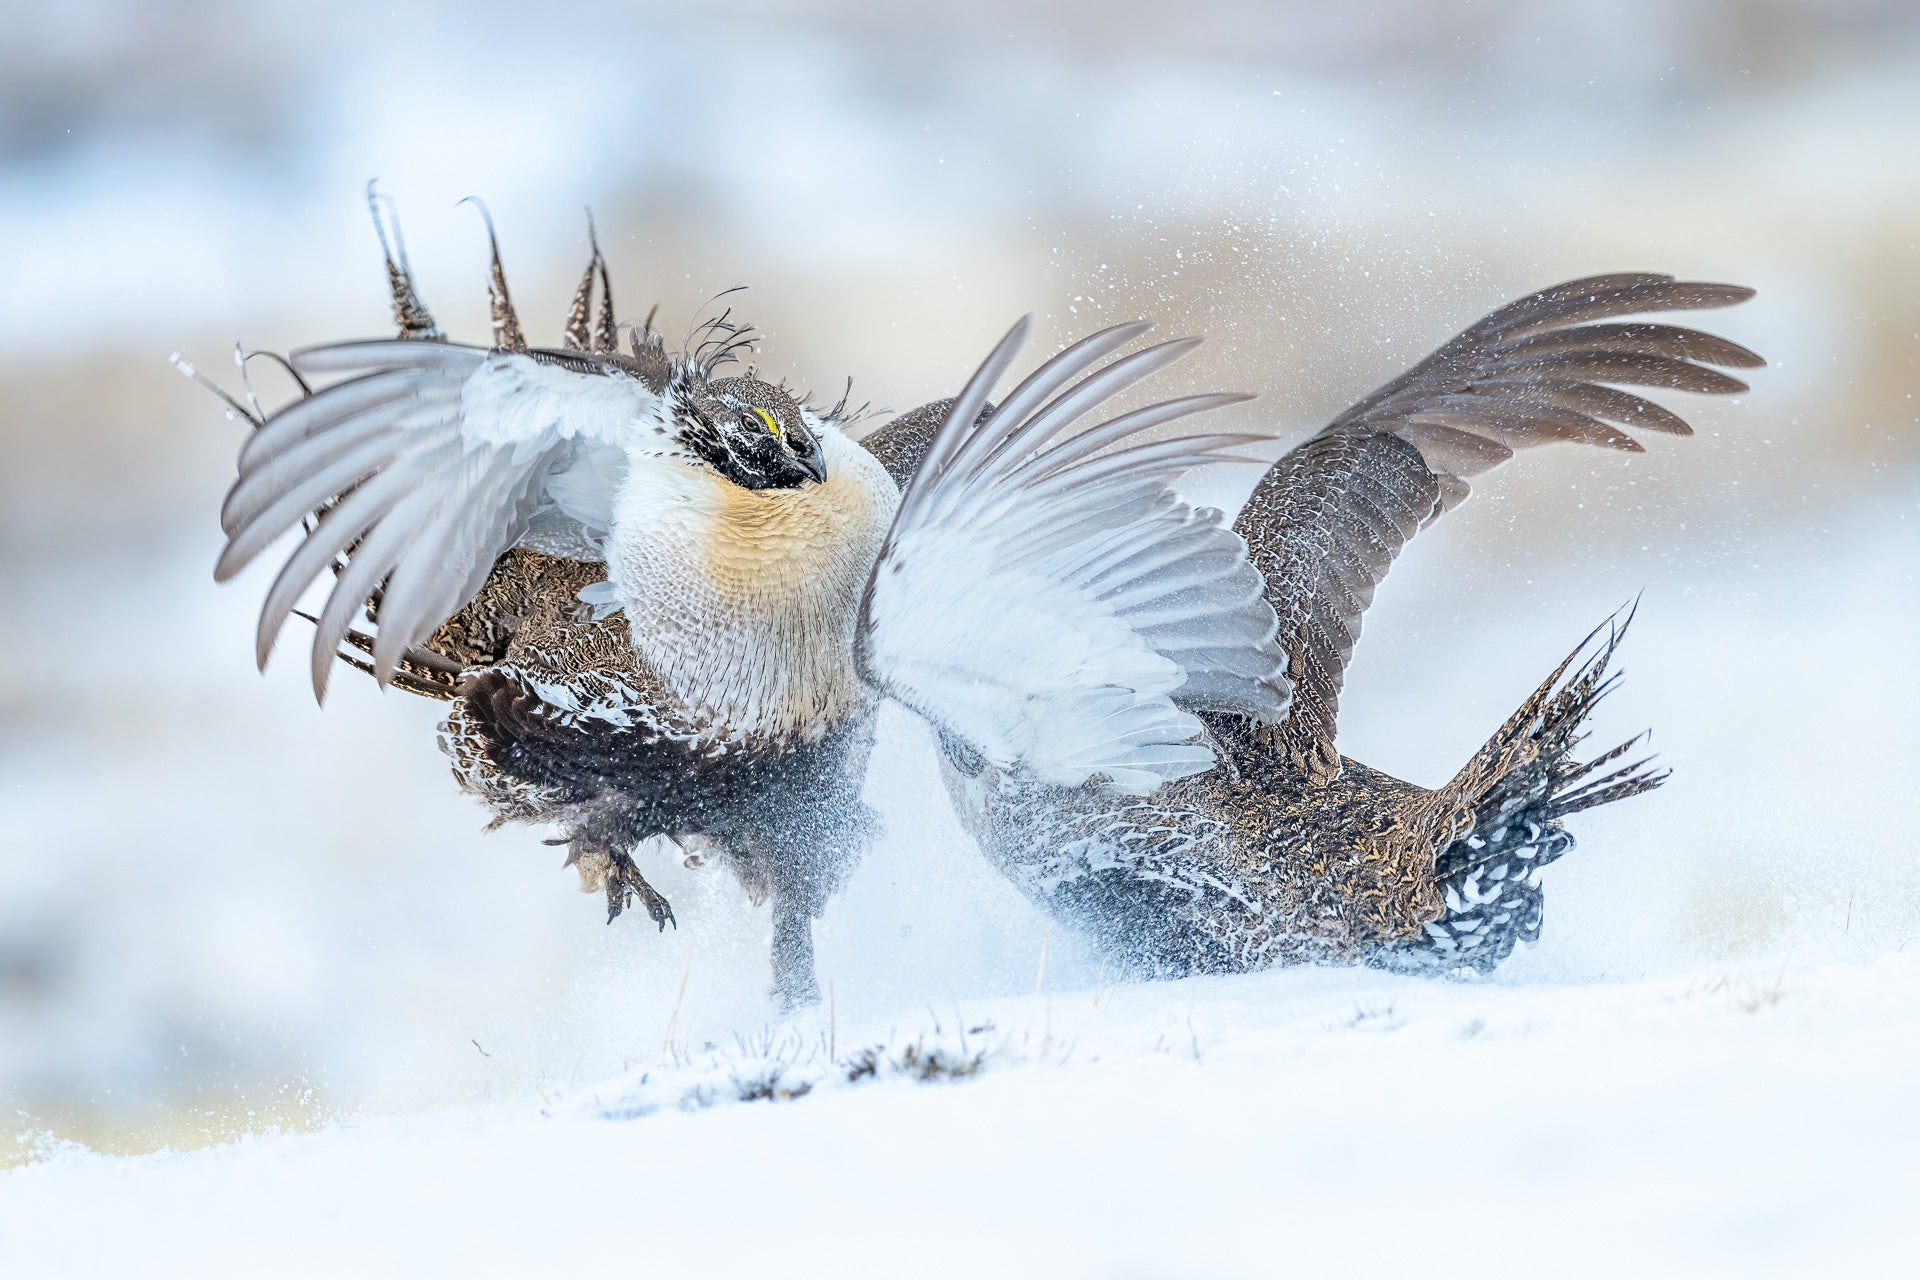 Two male sage grouses face off in the snow. (Photo: Peter Ismert)